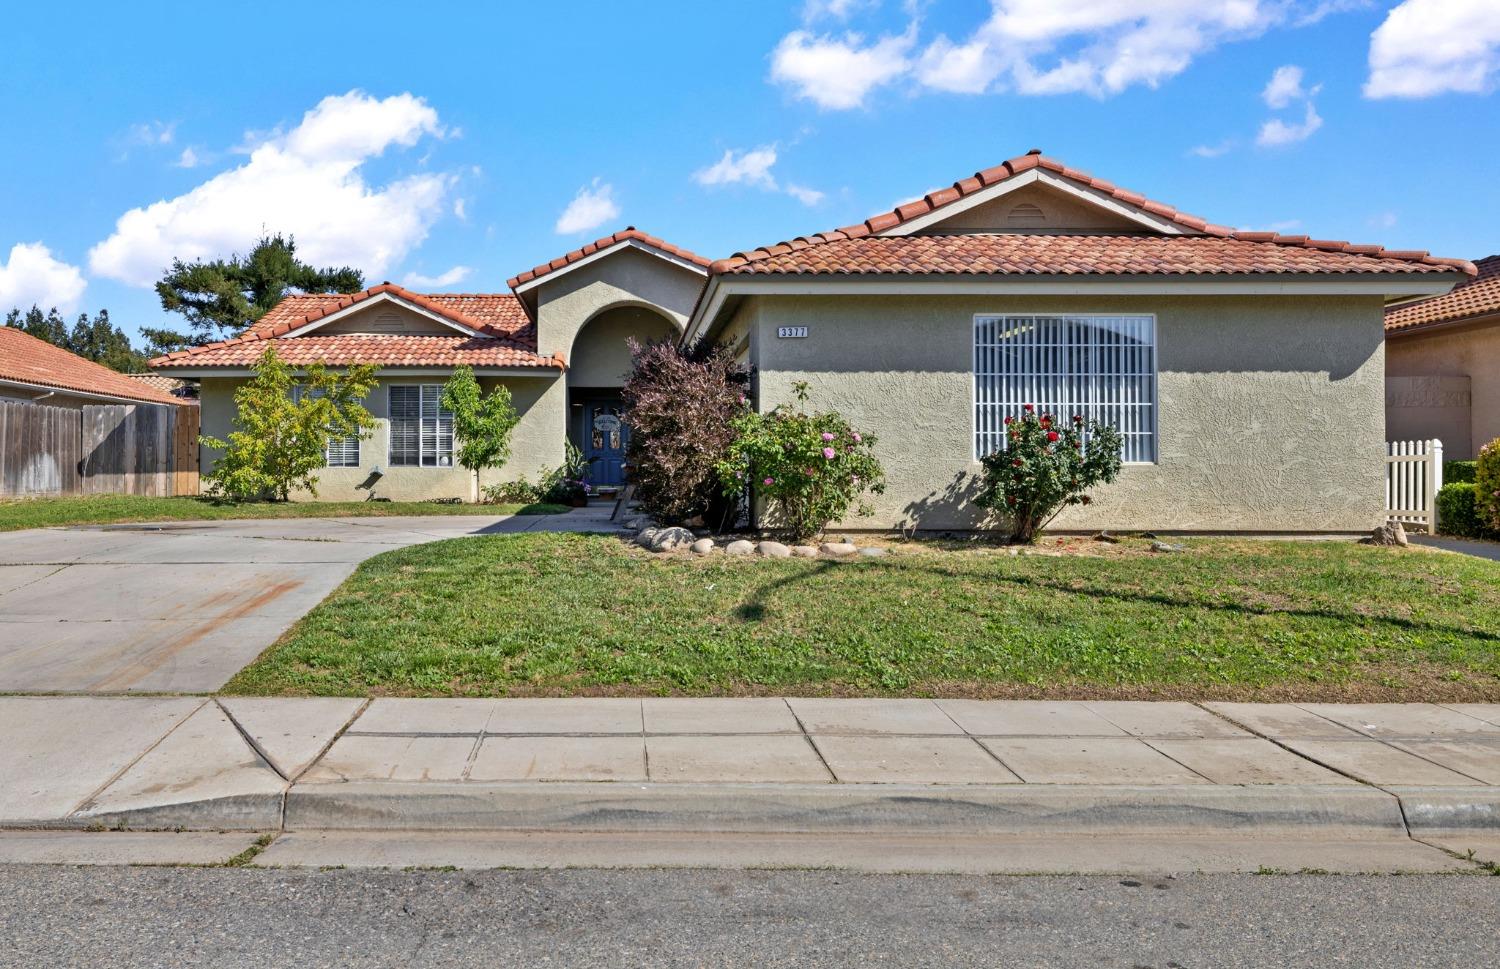 Photo of 3377 Kimmel Ave in Madera, CA